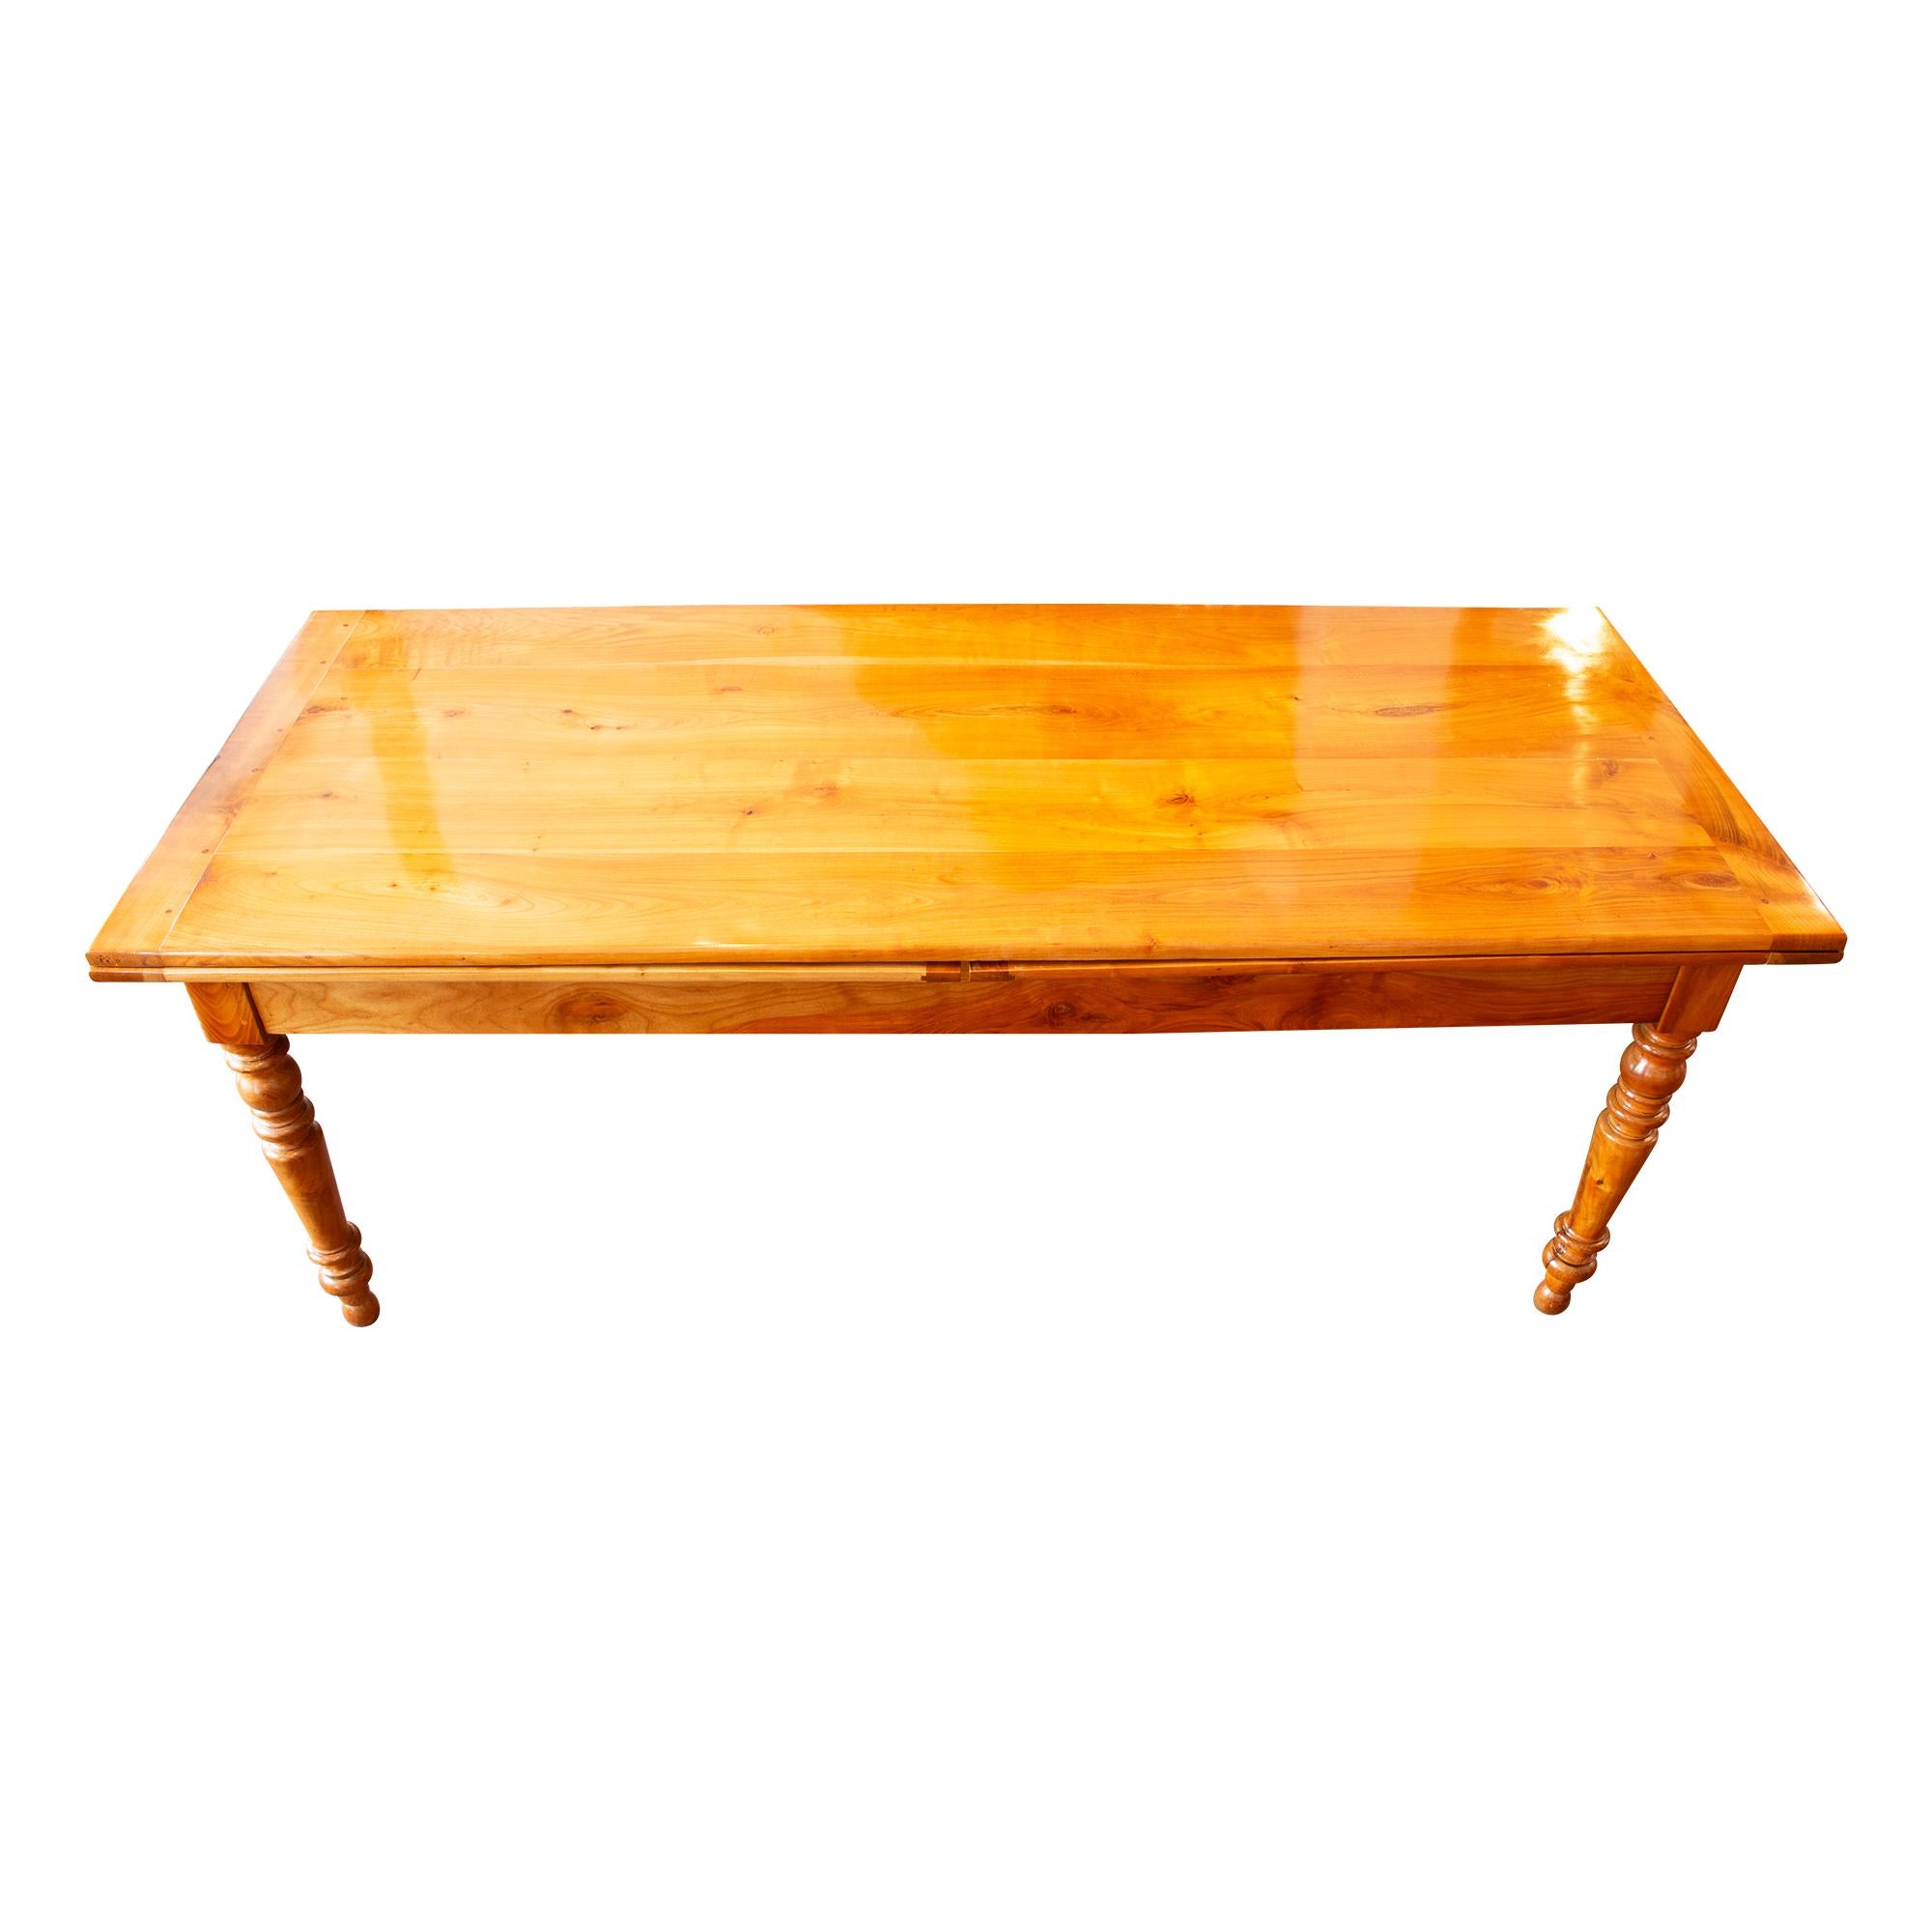 Introducing our exquisite offering: a remarkable country house table crafted from solid cherry wood, originating from the late Biedermeier period around 1850. This captivating piece boasts two cherry extendable tops, ensuring versatility and